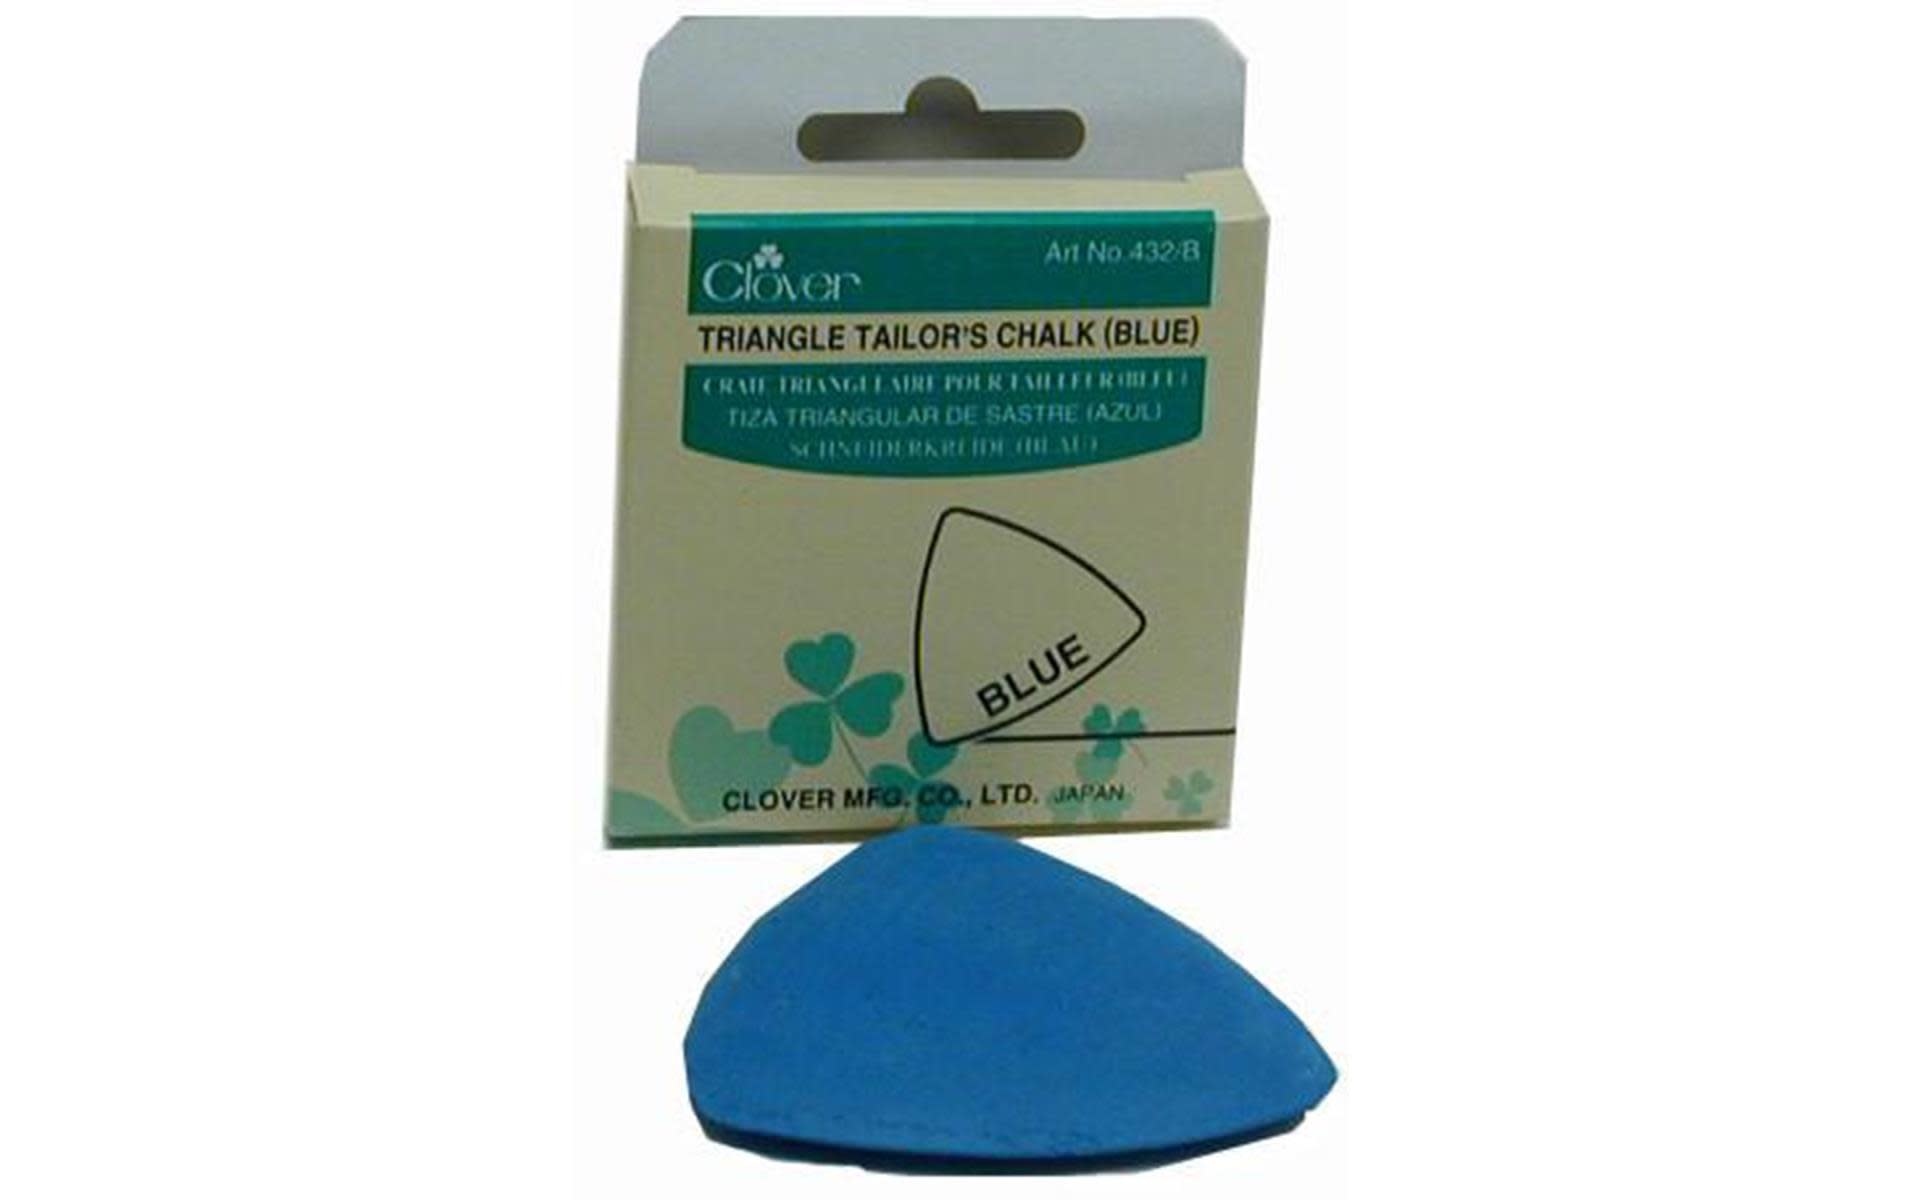 Clover Triangle Tailor's Chalk - Red